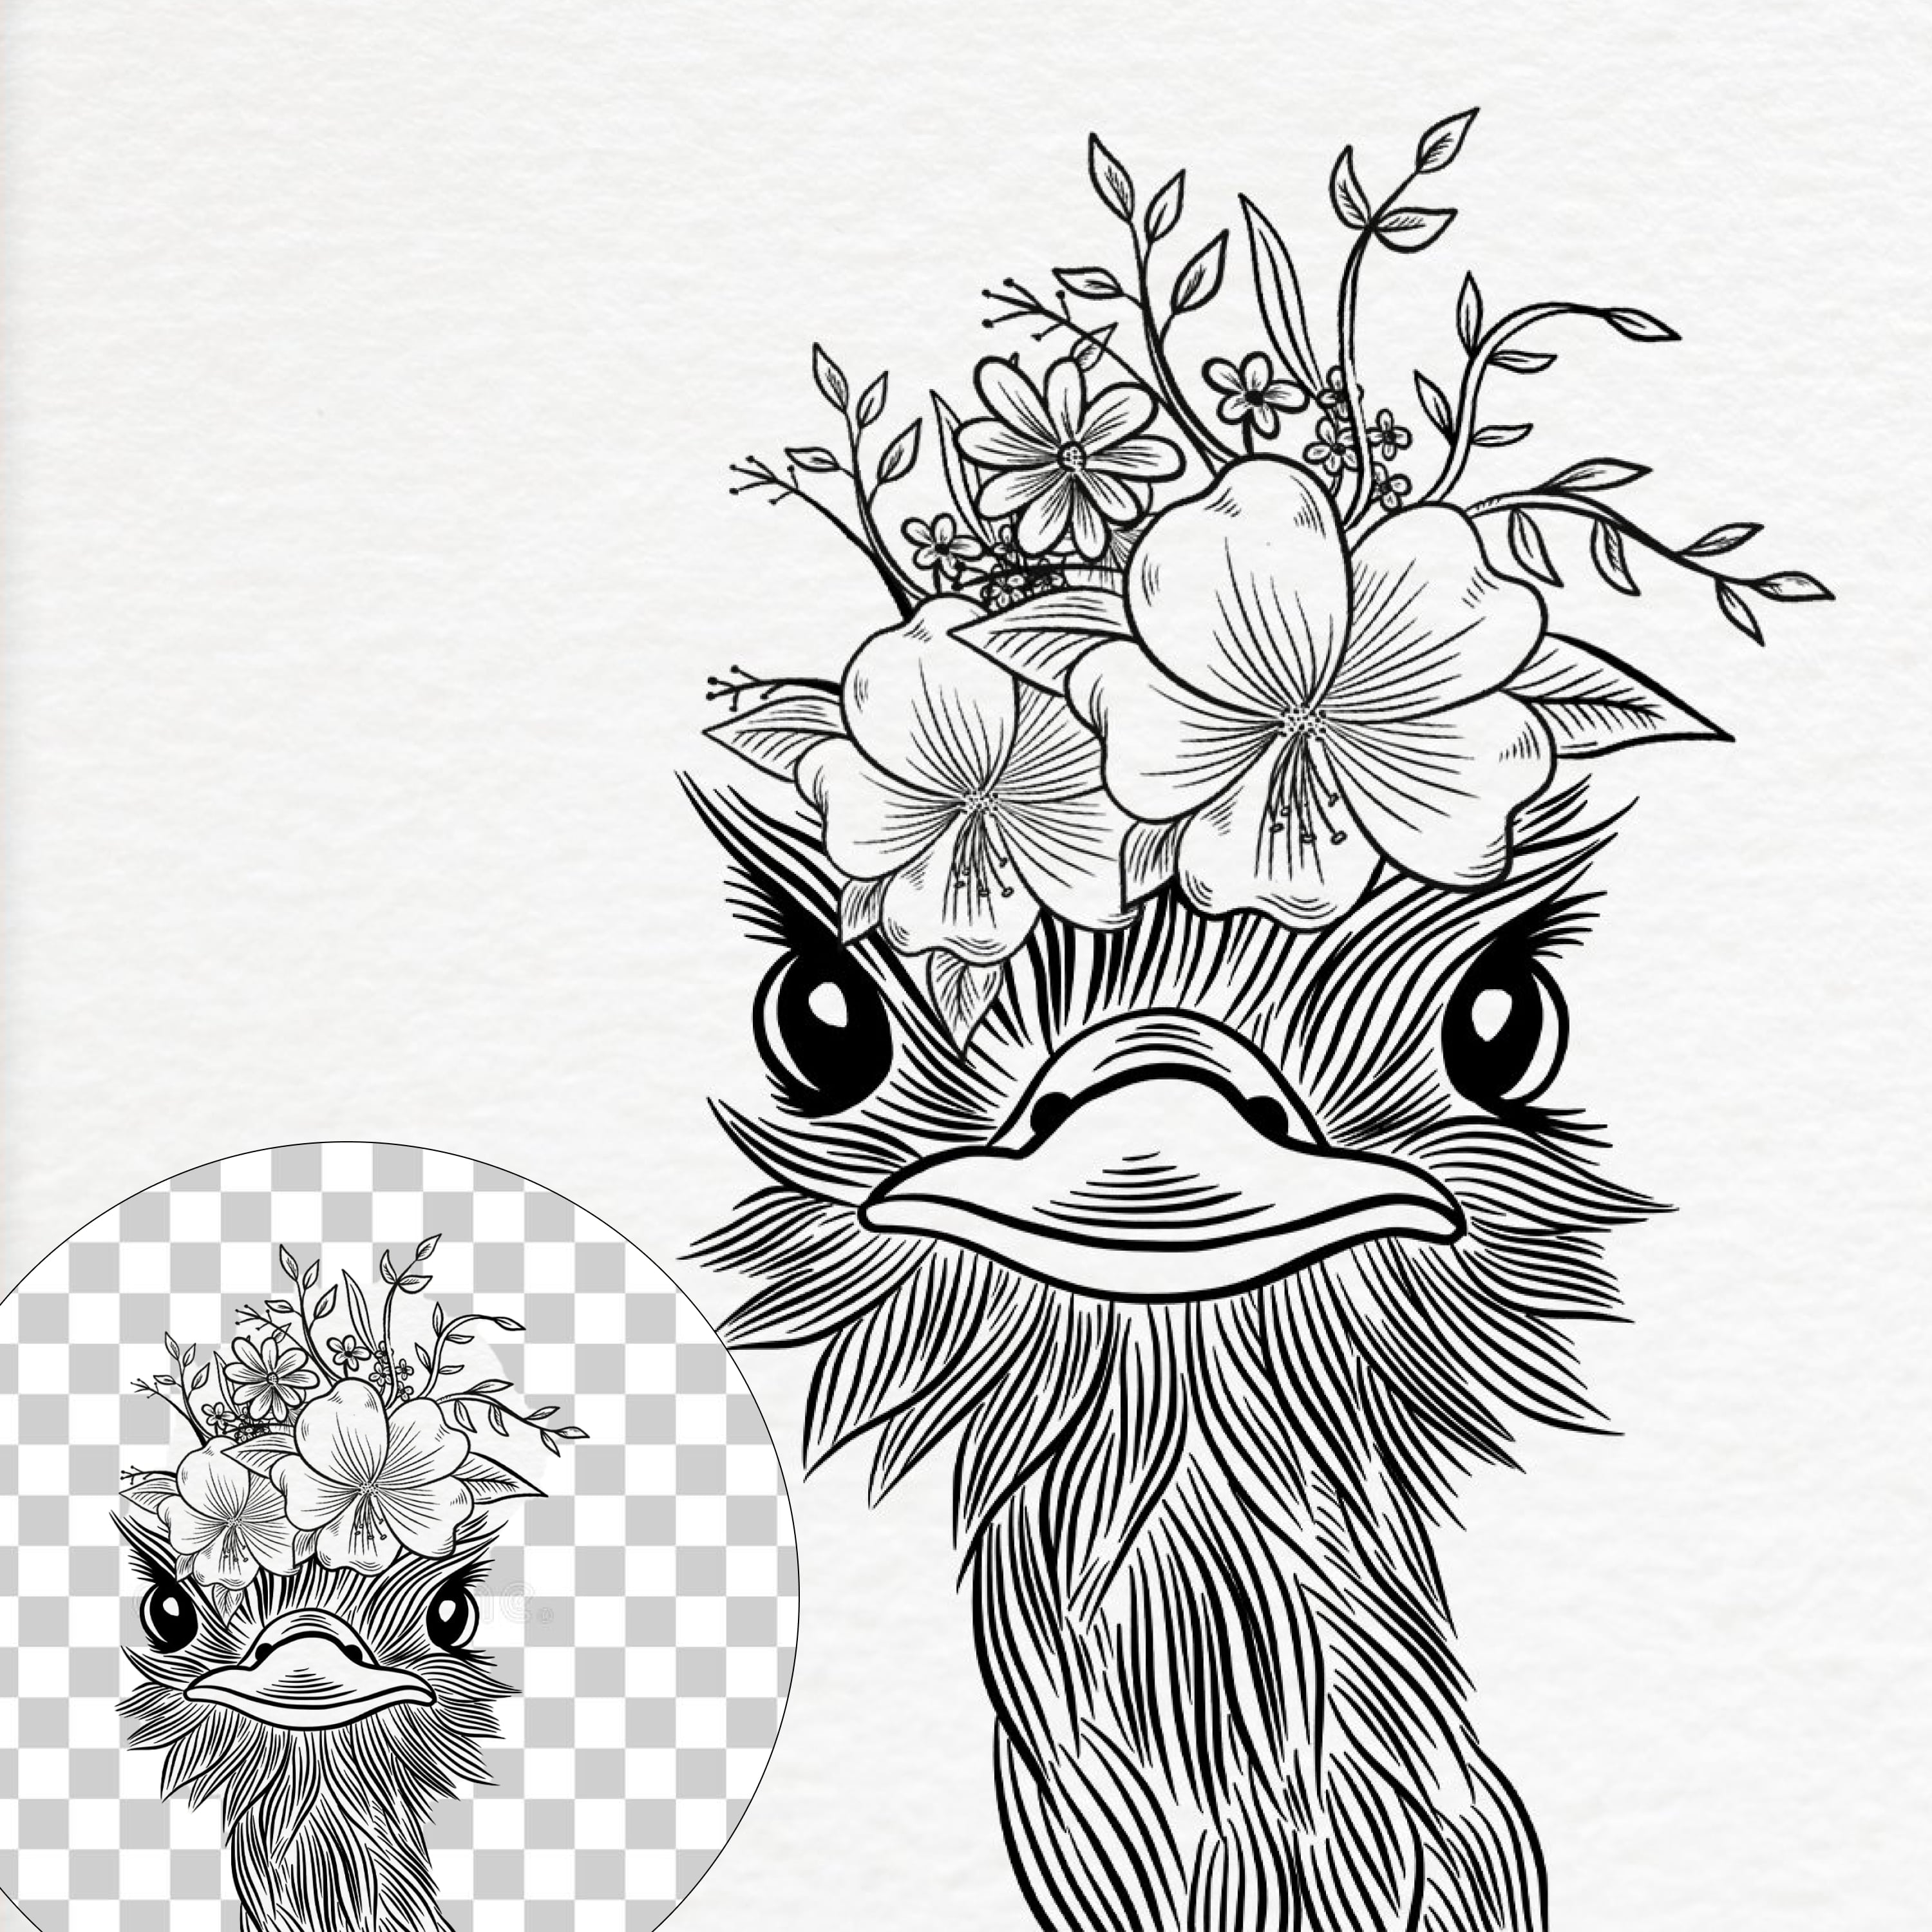 Boho illustration | Ostrich With Flowers cover.